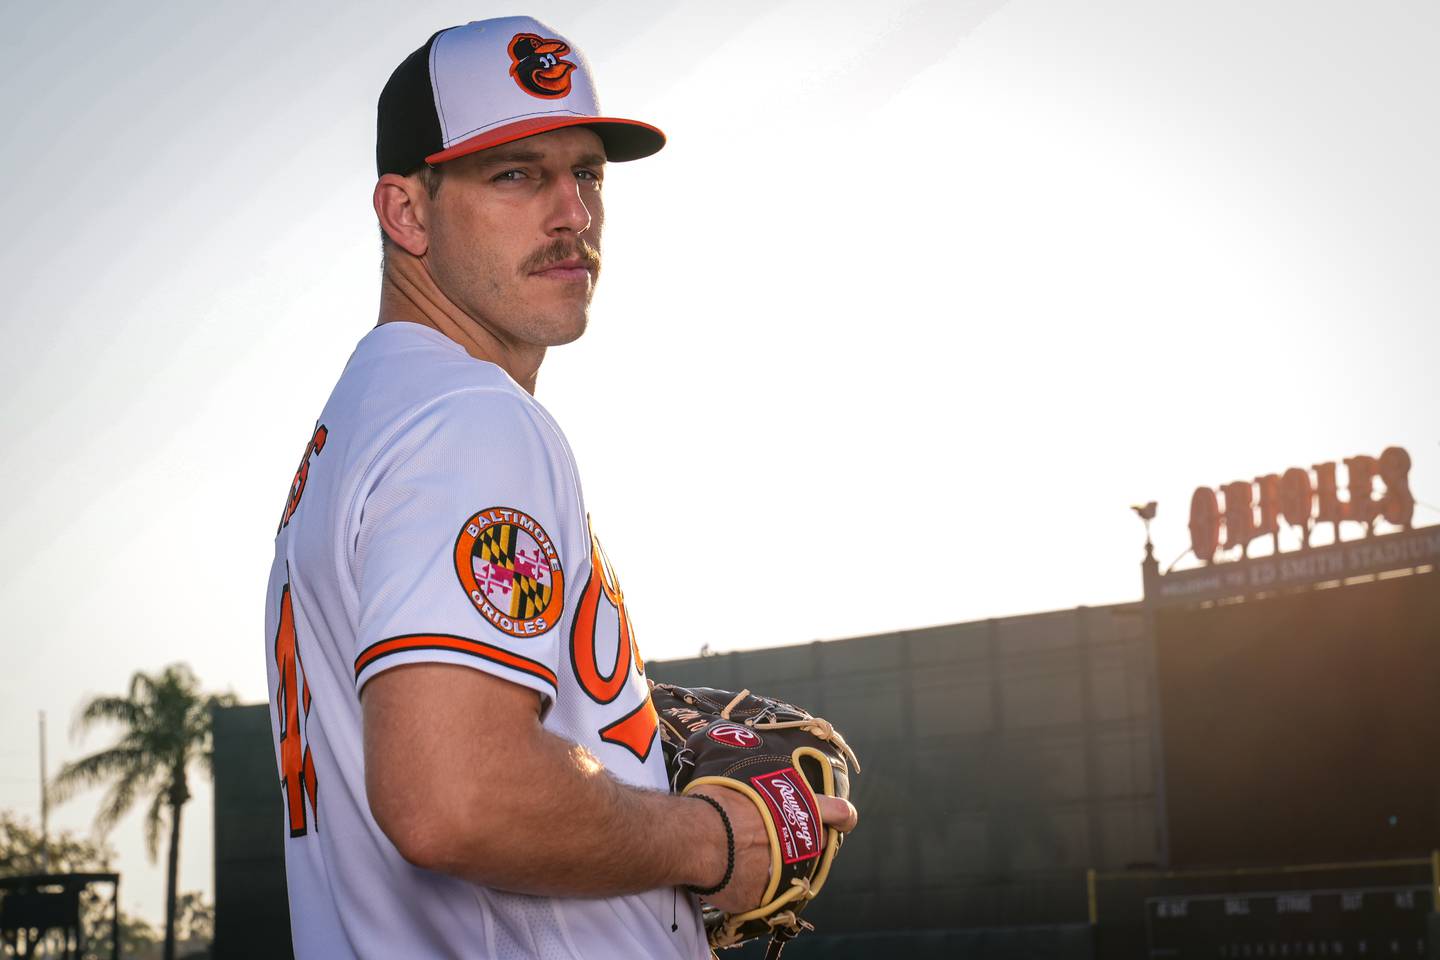 John Means (47) poses for a portrait during Photo Day at Ed Smith Stadium in Sarasota on 2/23/23. The Baltimore Orioles’ Spring Training session runs from mid-February through the end of March.